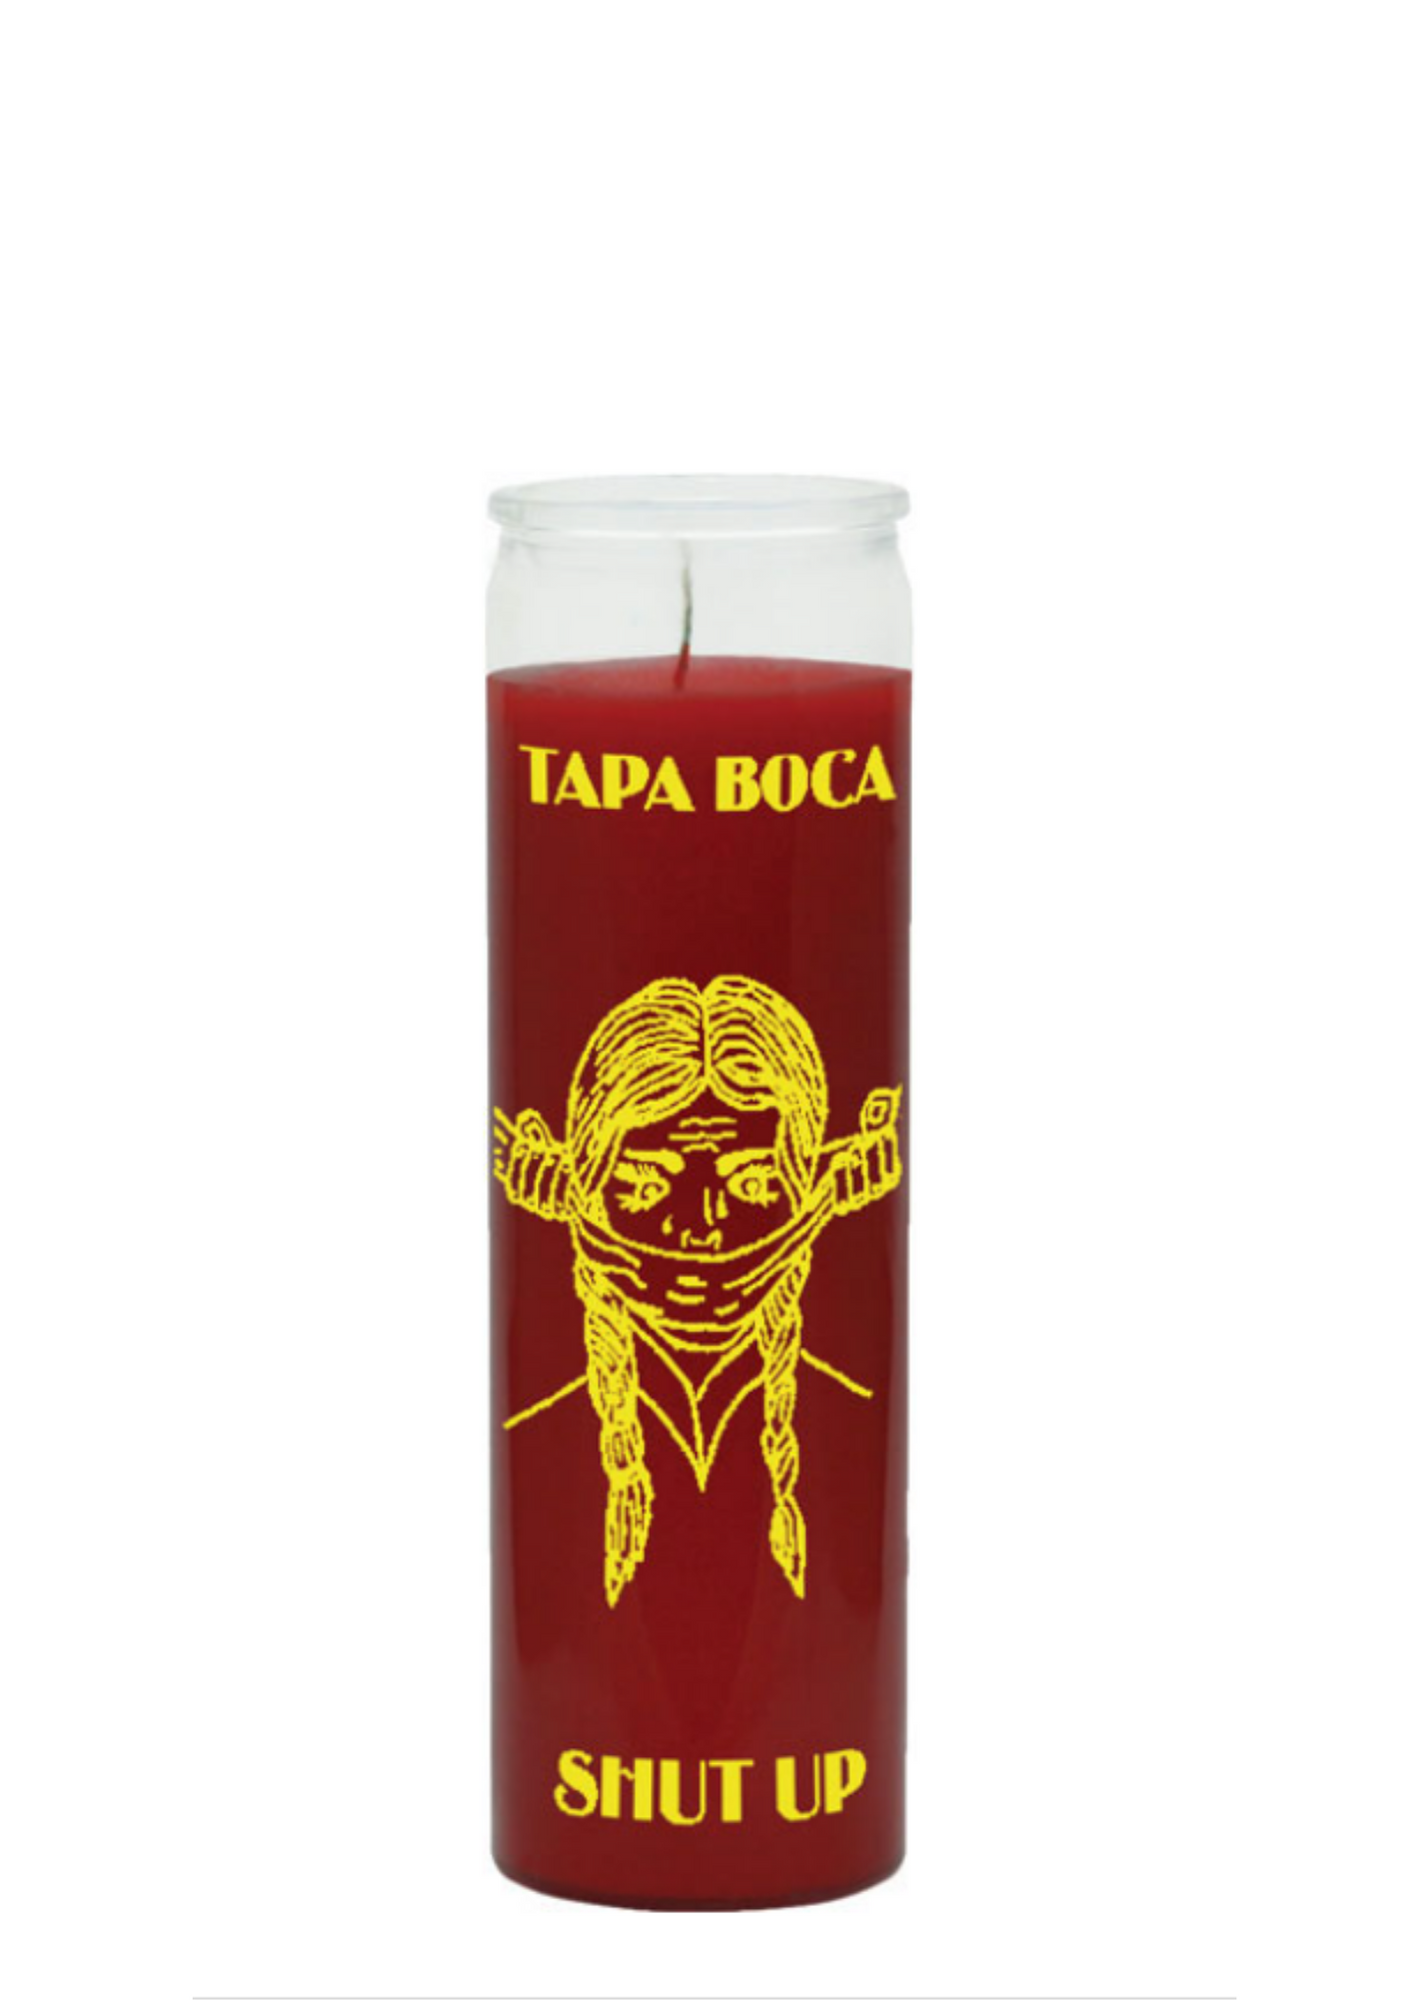 TAPA BOCA - SHUT UP (Red) 1 COLOR 7 DAY CANDLE